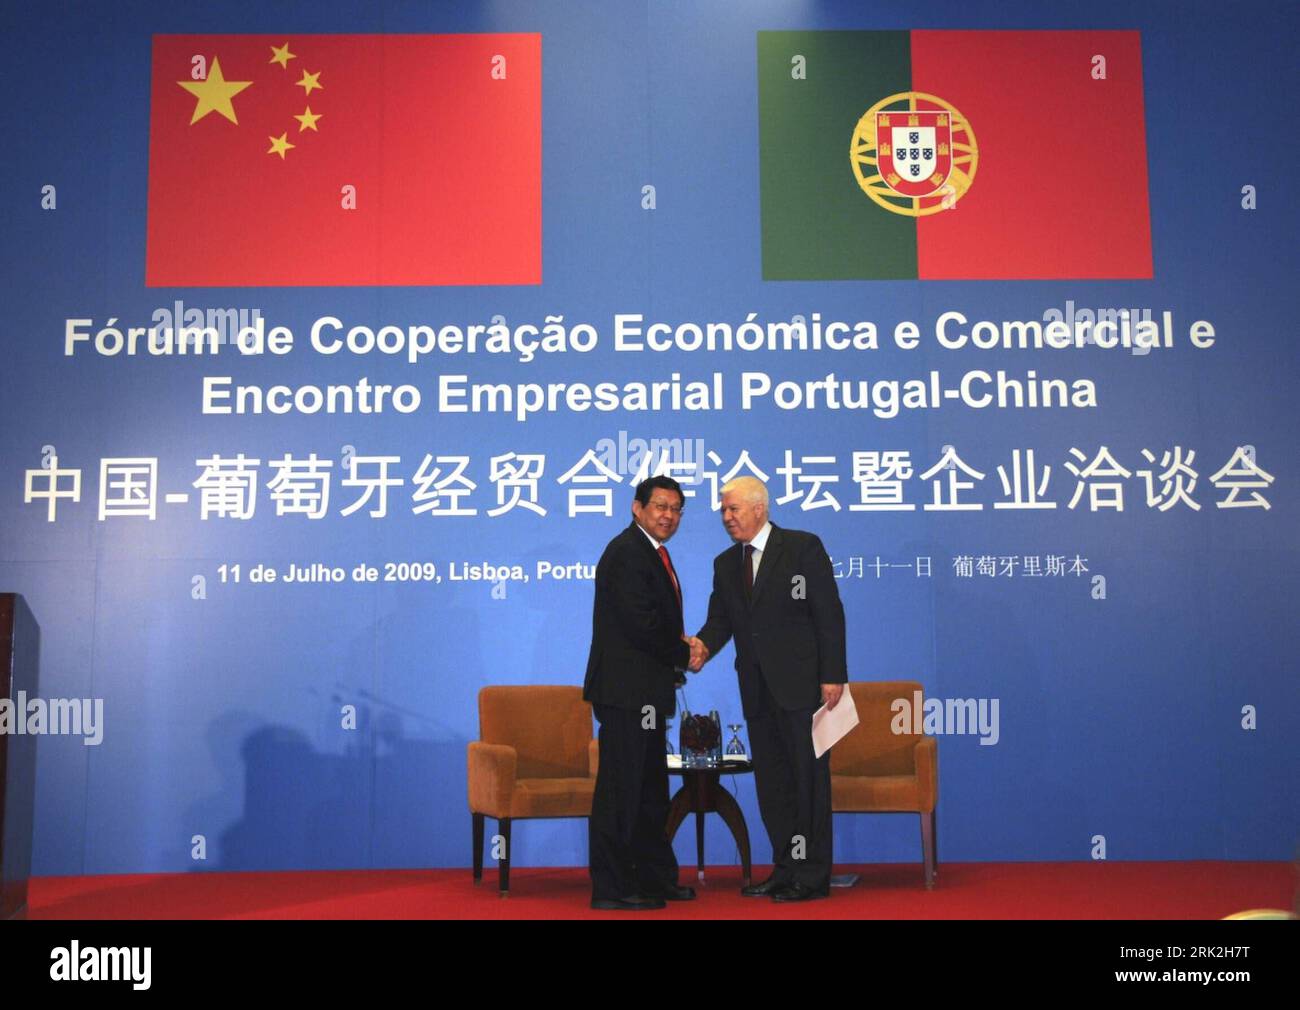 Bildnummer: 53193104  Datum: 11.07.2009  Copyright: imago/Xinhua (090712) -- LISBON, July 12, 2009 (Xinhua) -- Chinese Minister of Commerce Chen Deming (L) and Fernando Teixeira dos Santos, Portuguese Minister of State, Finance, Economy and Innovation, shake hands during the opening ceremony of a forum on the economic and trade cooperation between China and Portugal in Lisbon, Portugal, July 11, 2009. A Chinese trade investment promotion group visited Portugal Saturday.        (Xinhua/An Yongfeng)  (dzl) (3)PORTUGAL-CHINA-ECONOMIC AND TRADE COOPERATION-FORUM   Handelsforum, Wirtschaftsminister Stock Photo